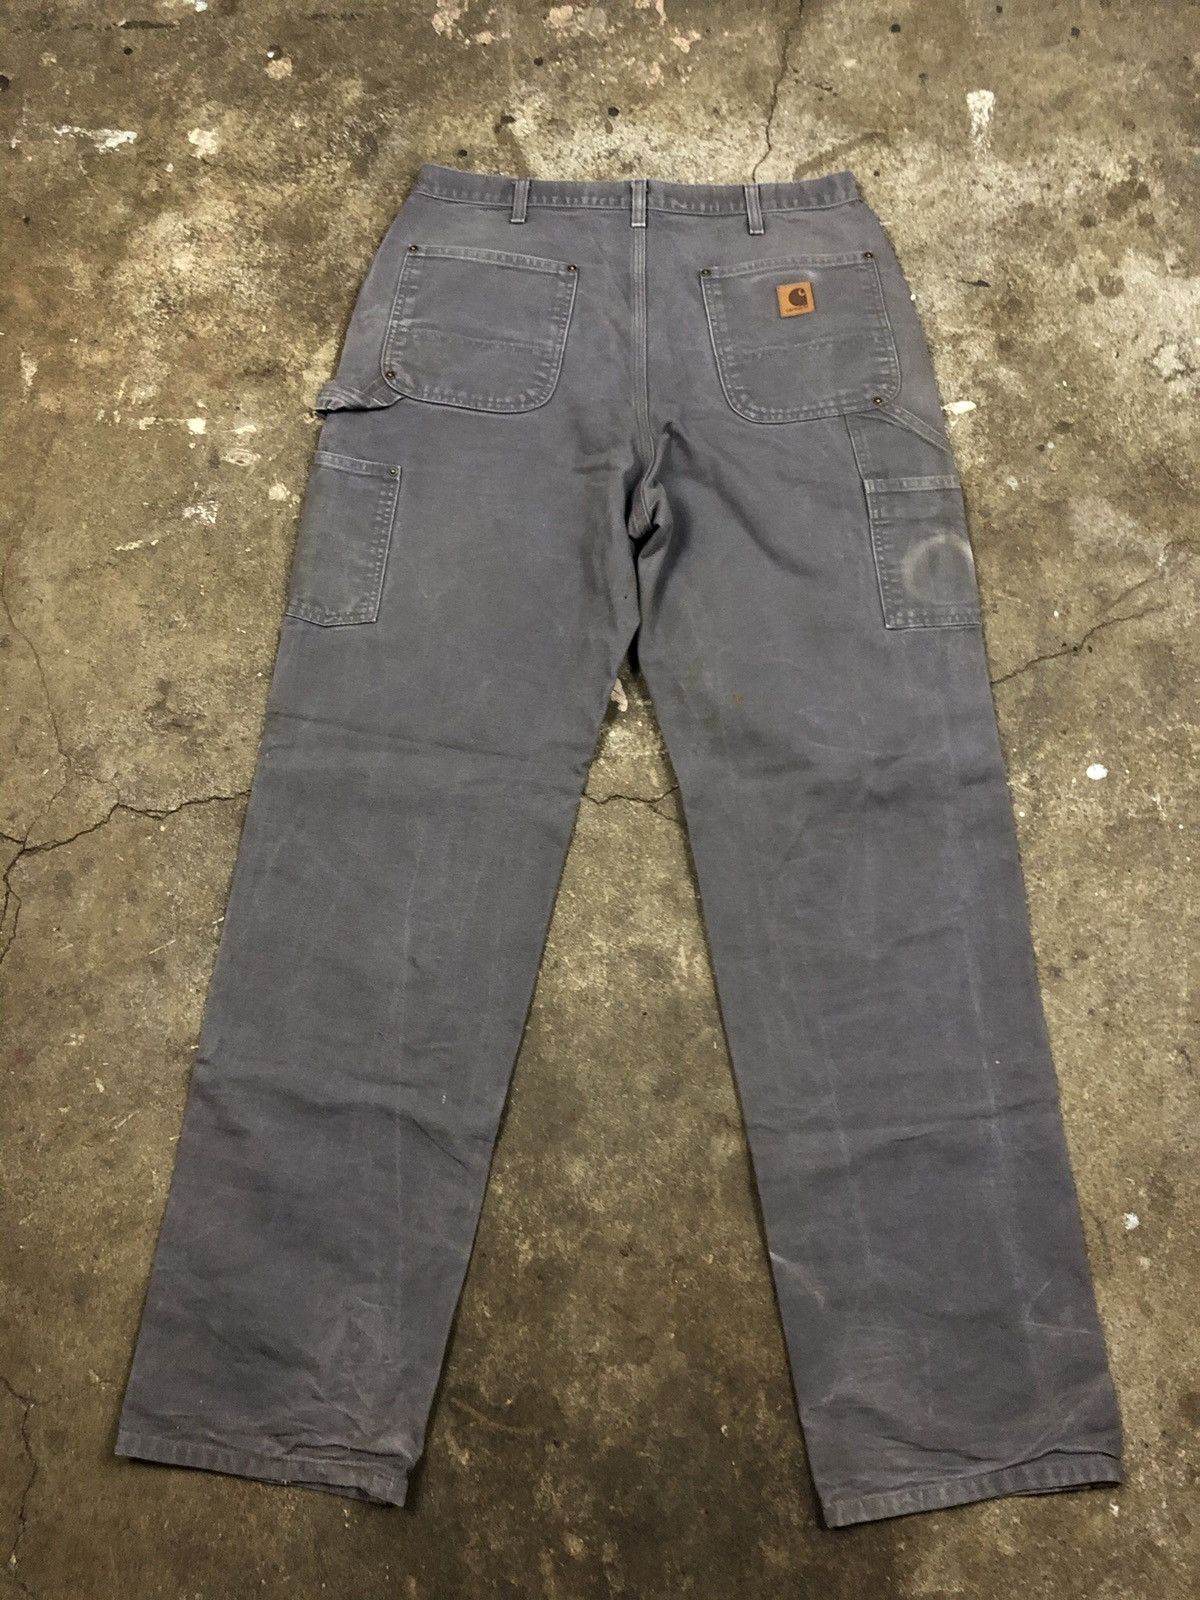 Vintage Carhartt Double Knee Work Pants 34x36 Faded Distressed Size US 34 / EU 50 - 2 Preview